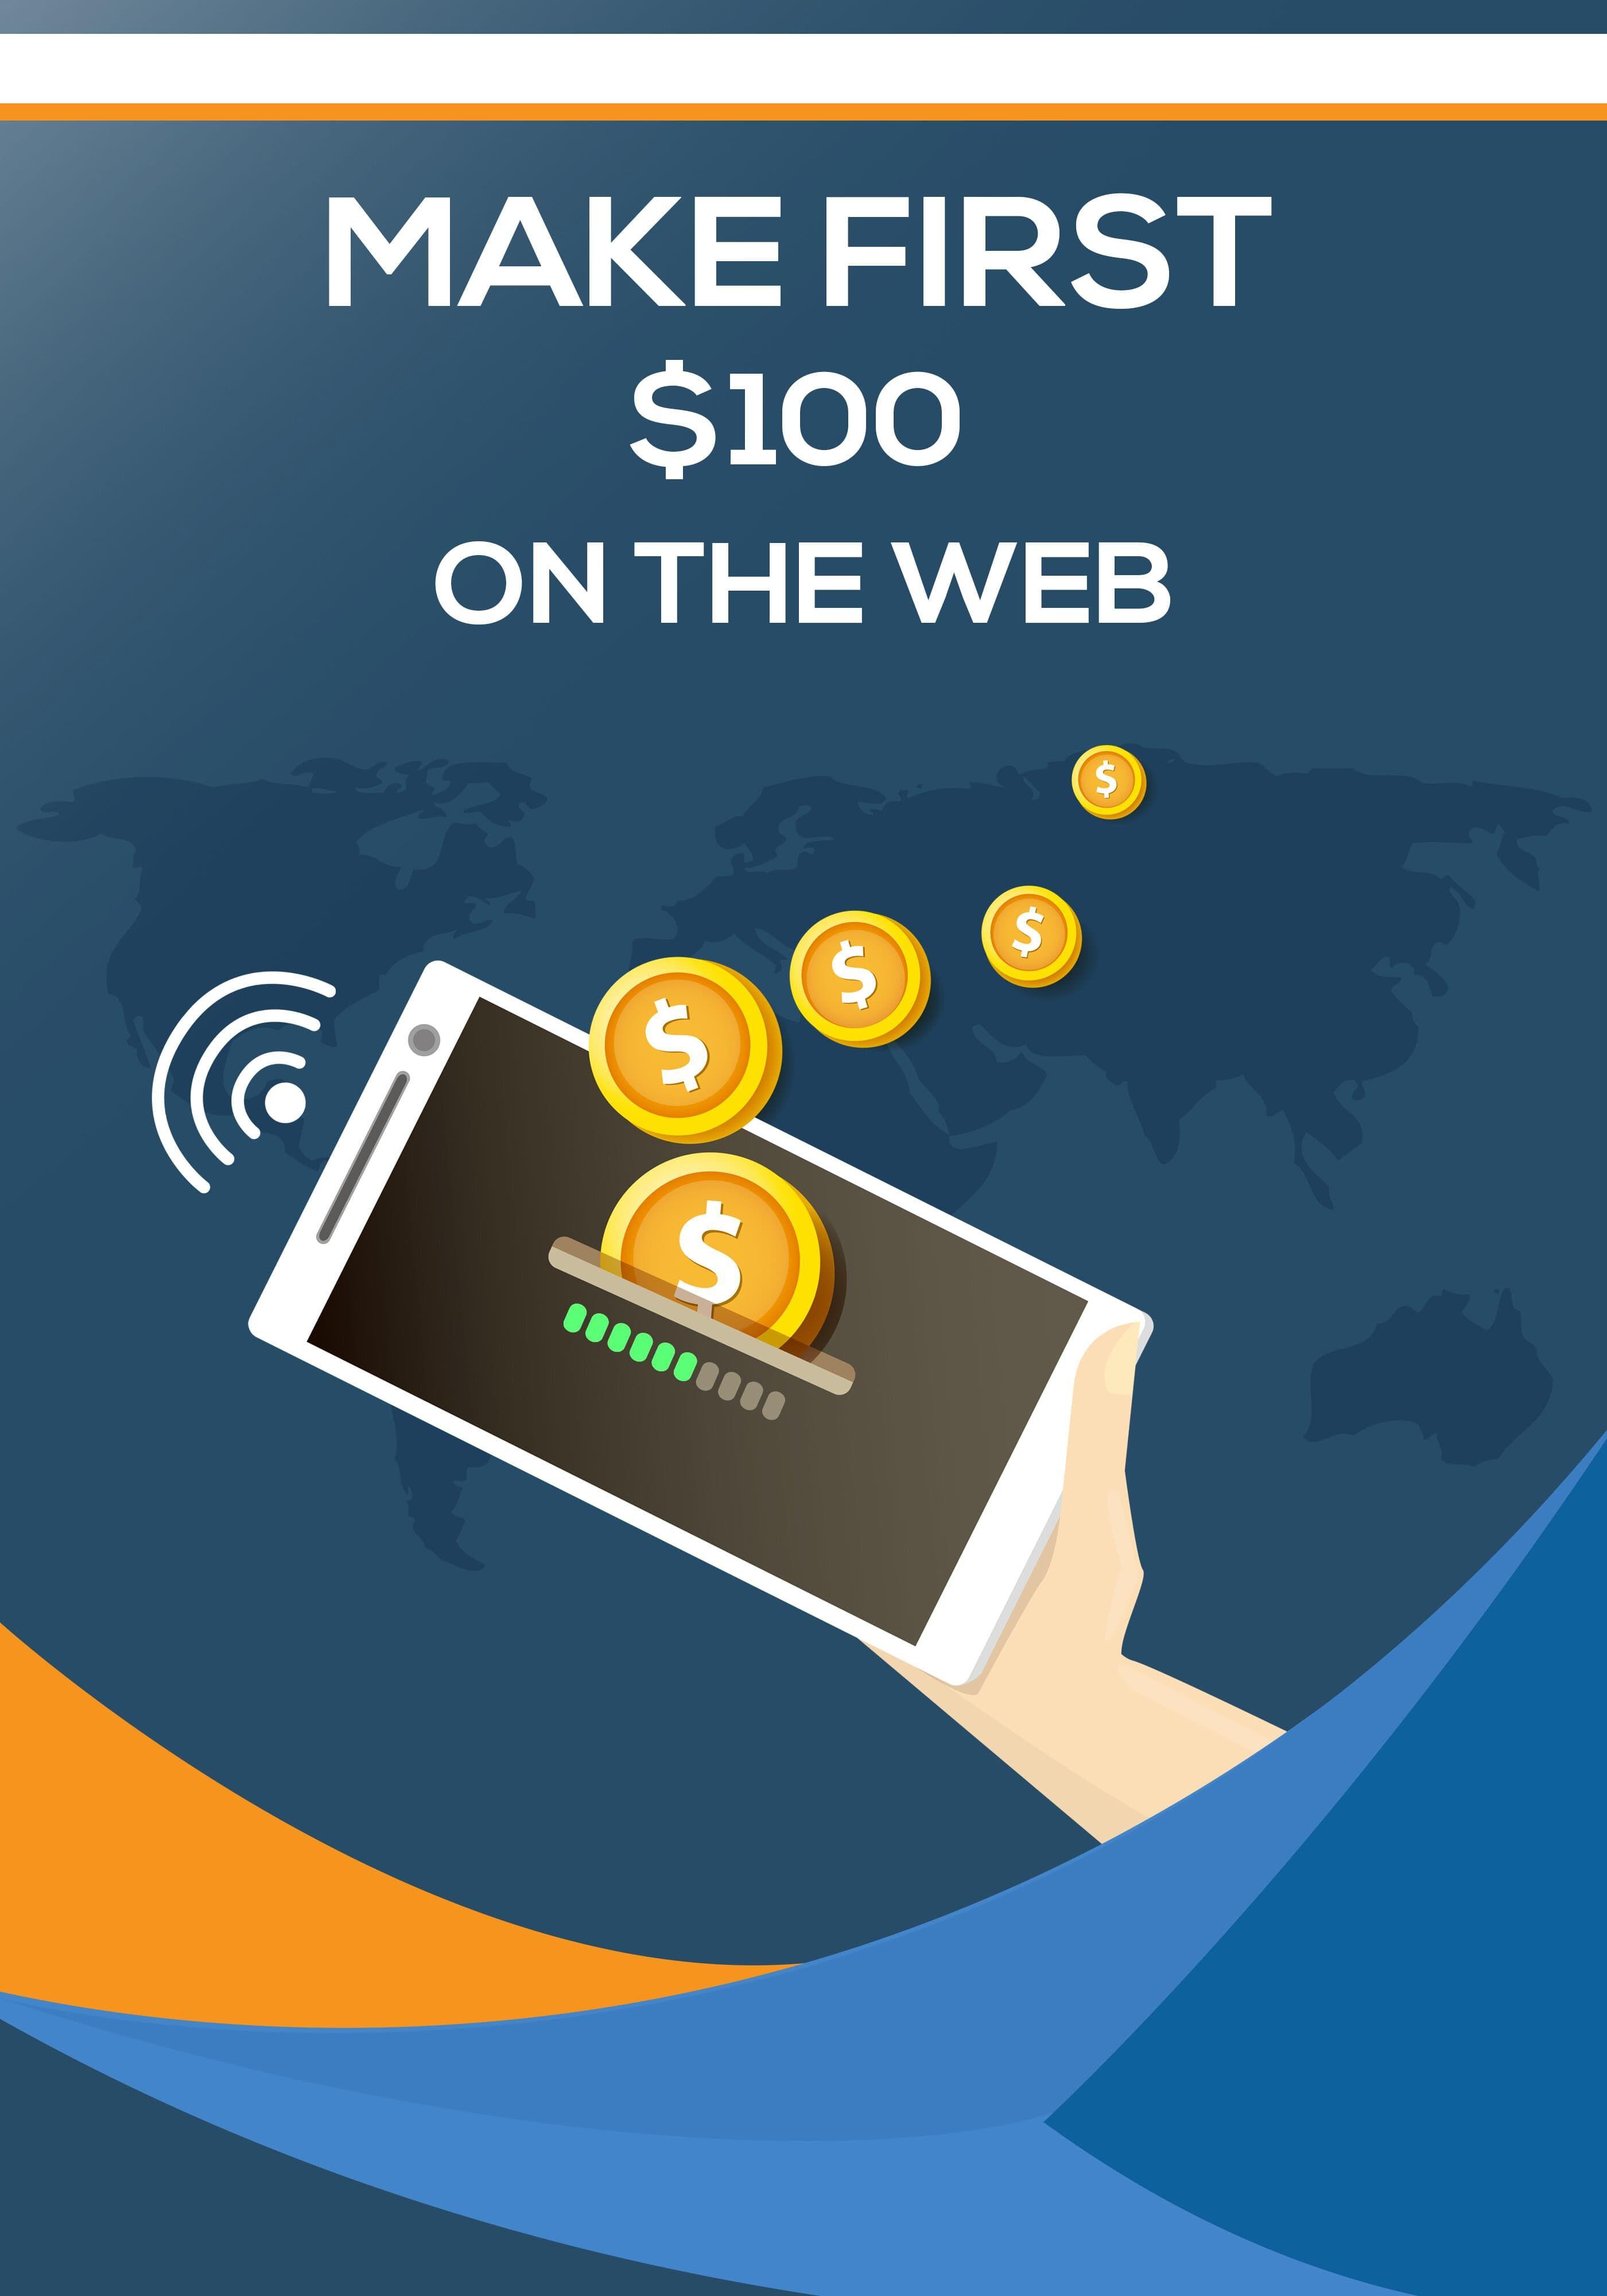 Make First $100 On The Web eBook's Book Image